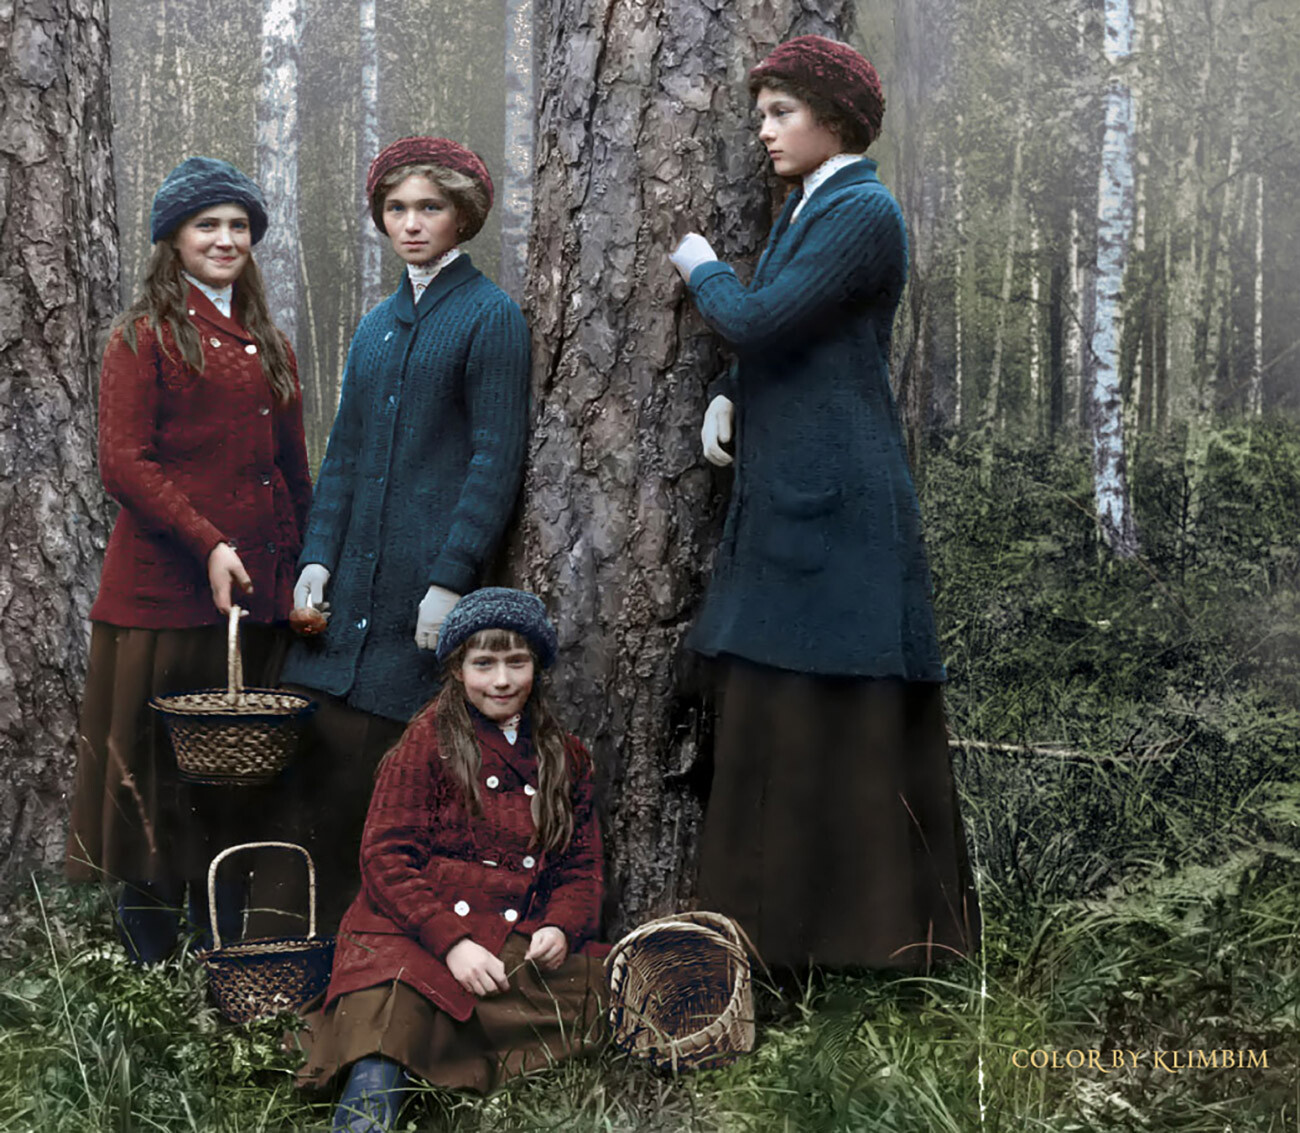 The Grand Duchesses hunting for mushrooms in a forest